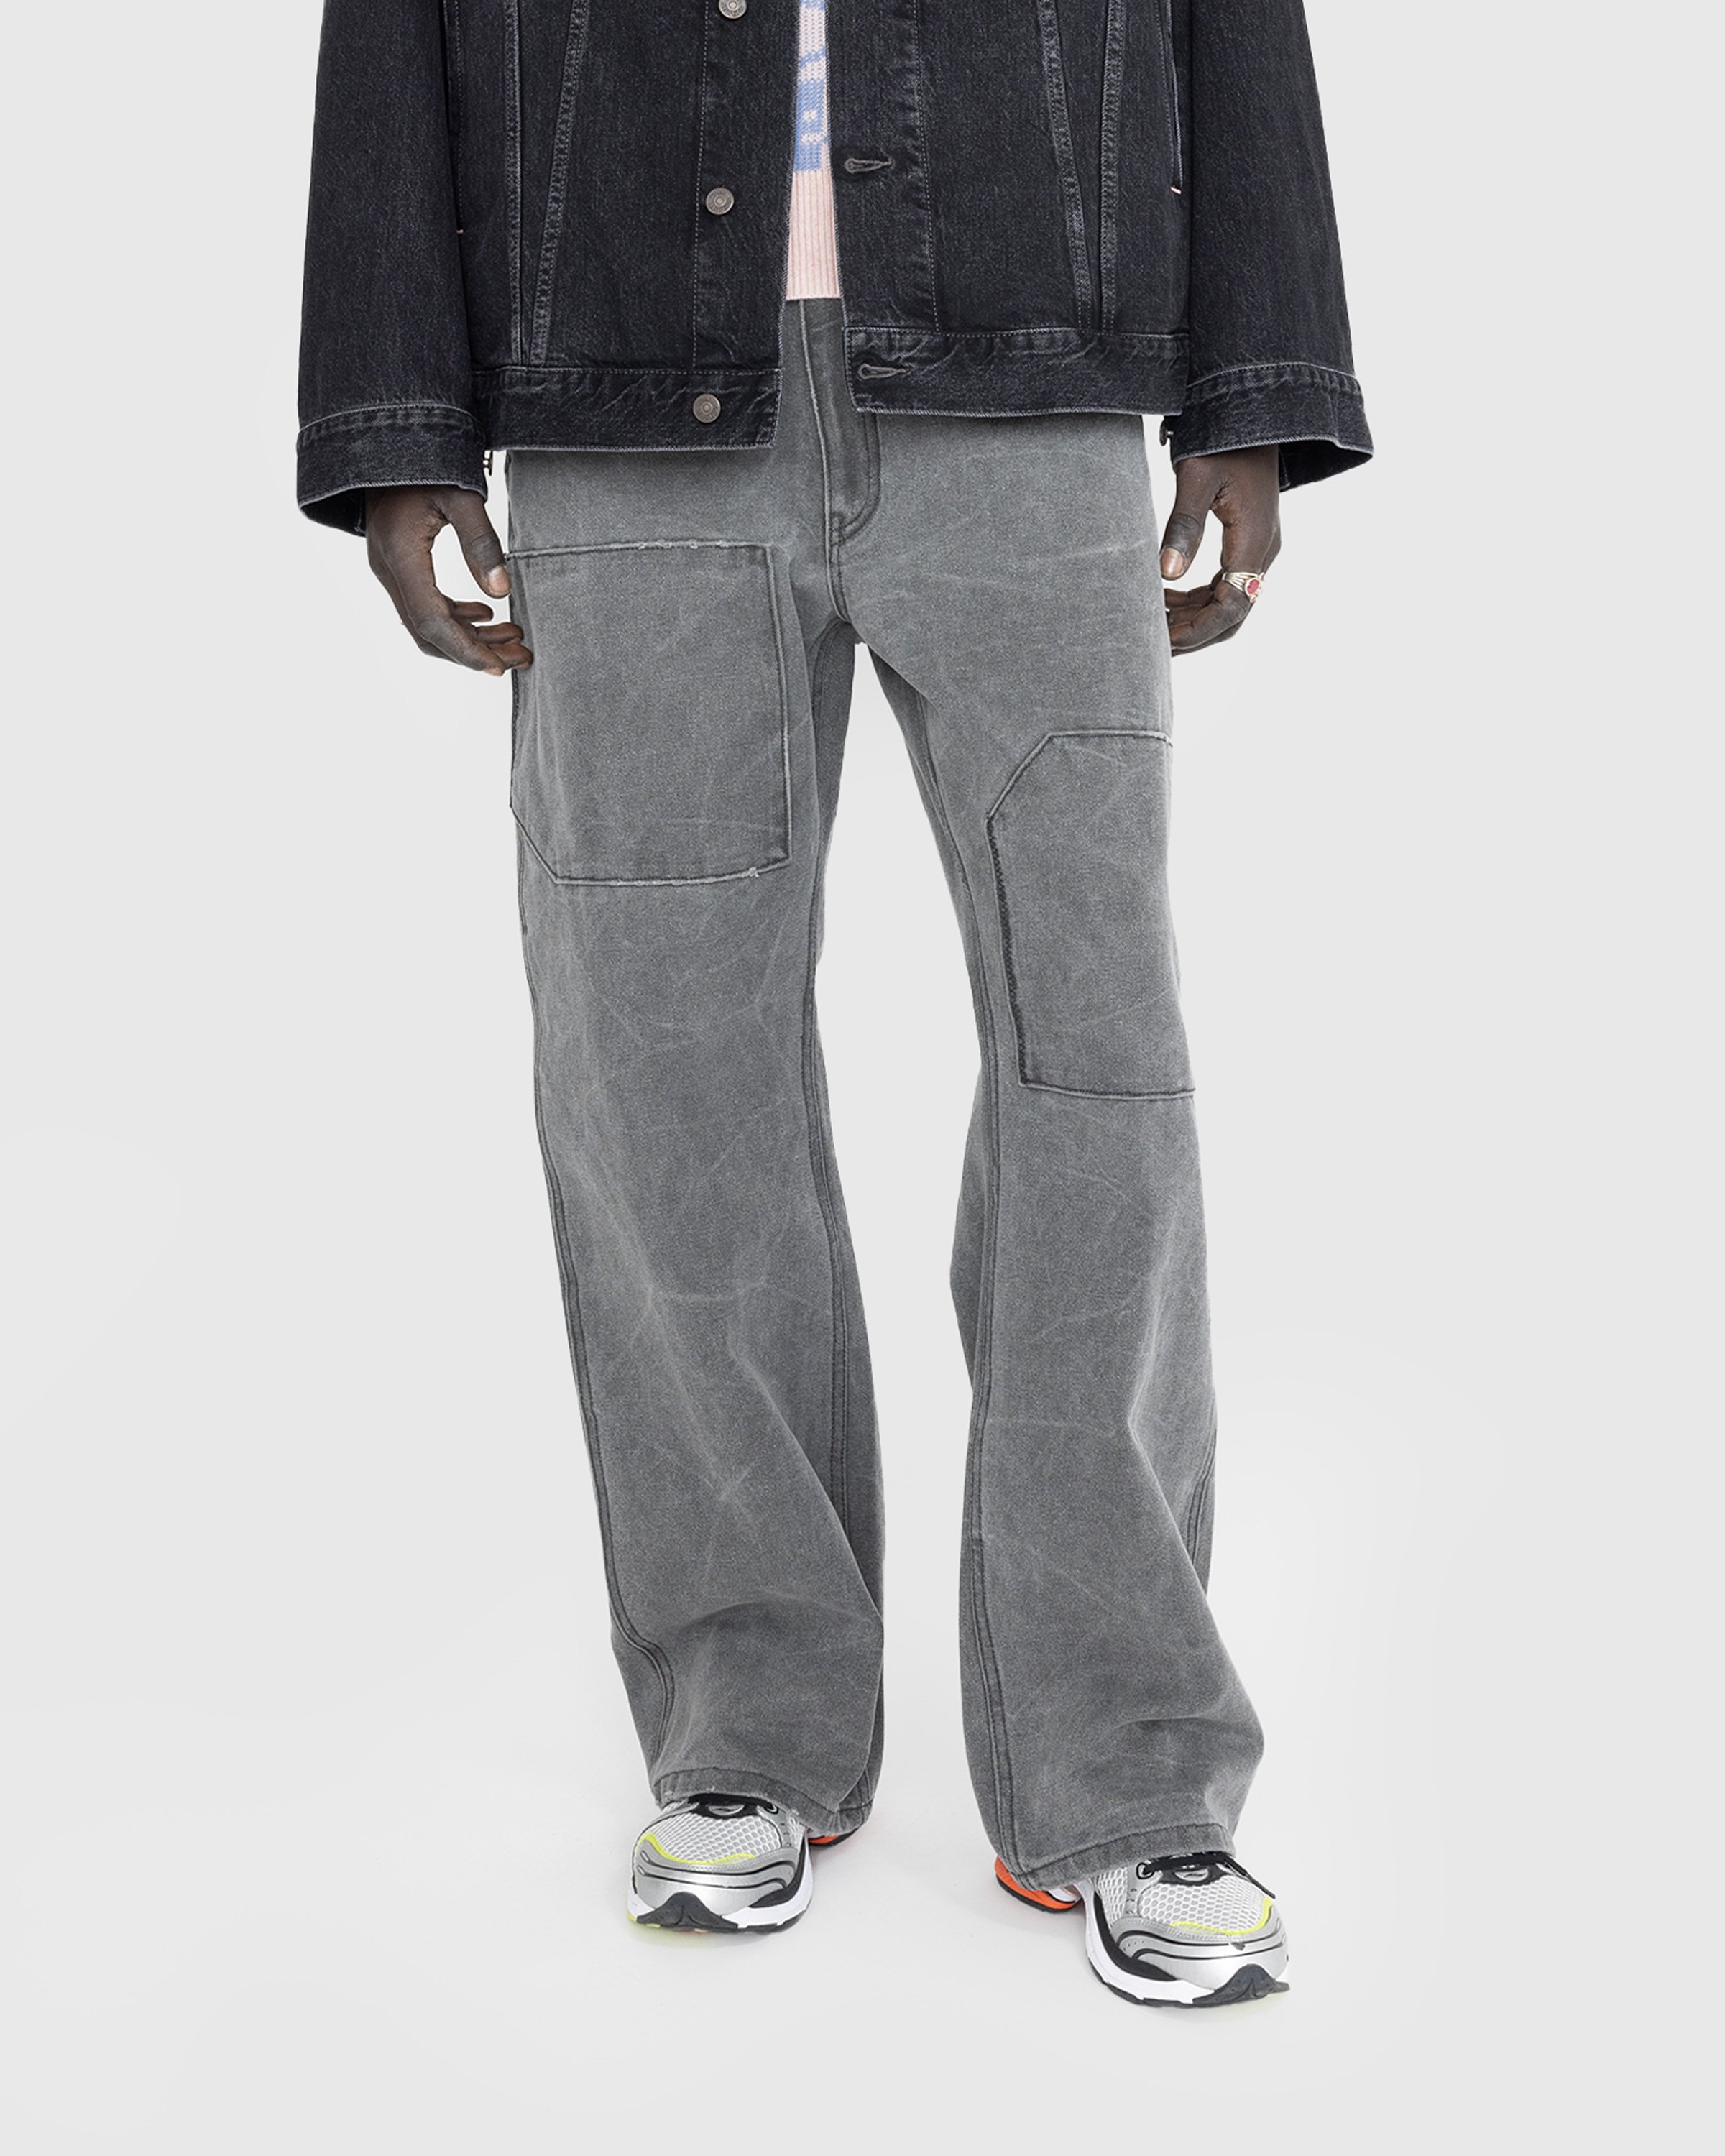 Acne Studios - Patch Canvas Trousers Carbon Gray - Clothing - Grey - Image 2